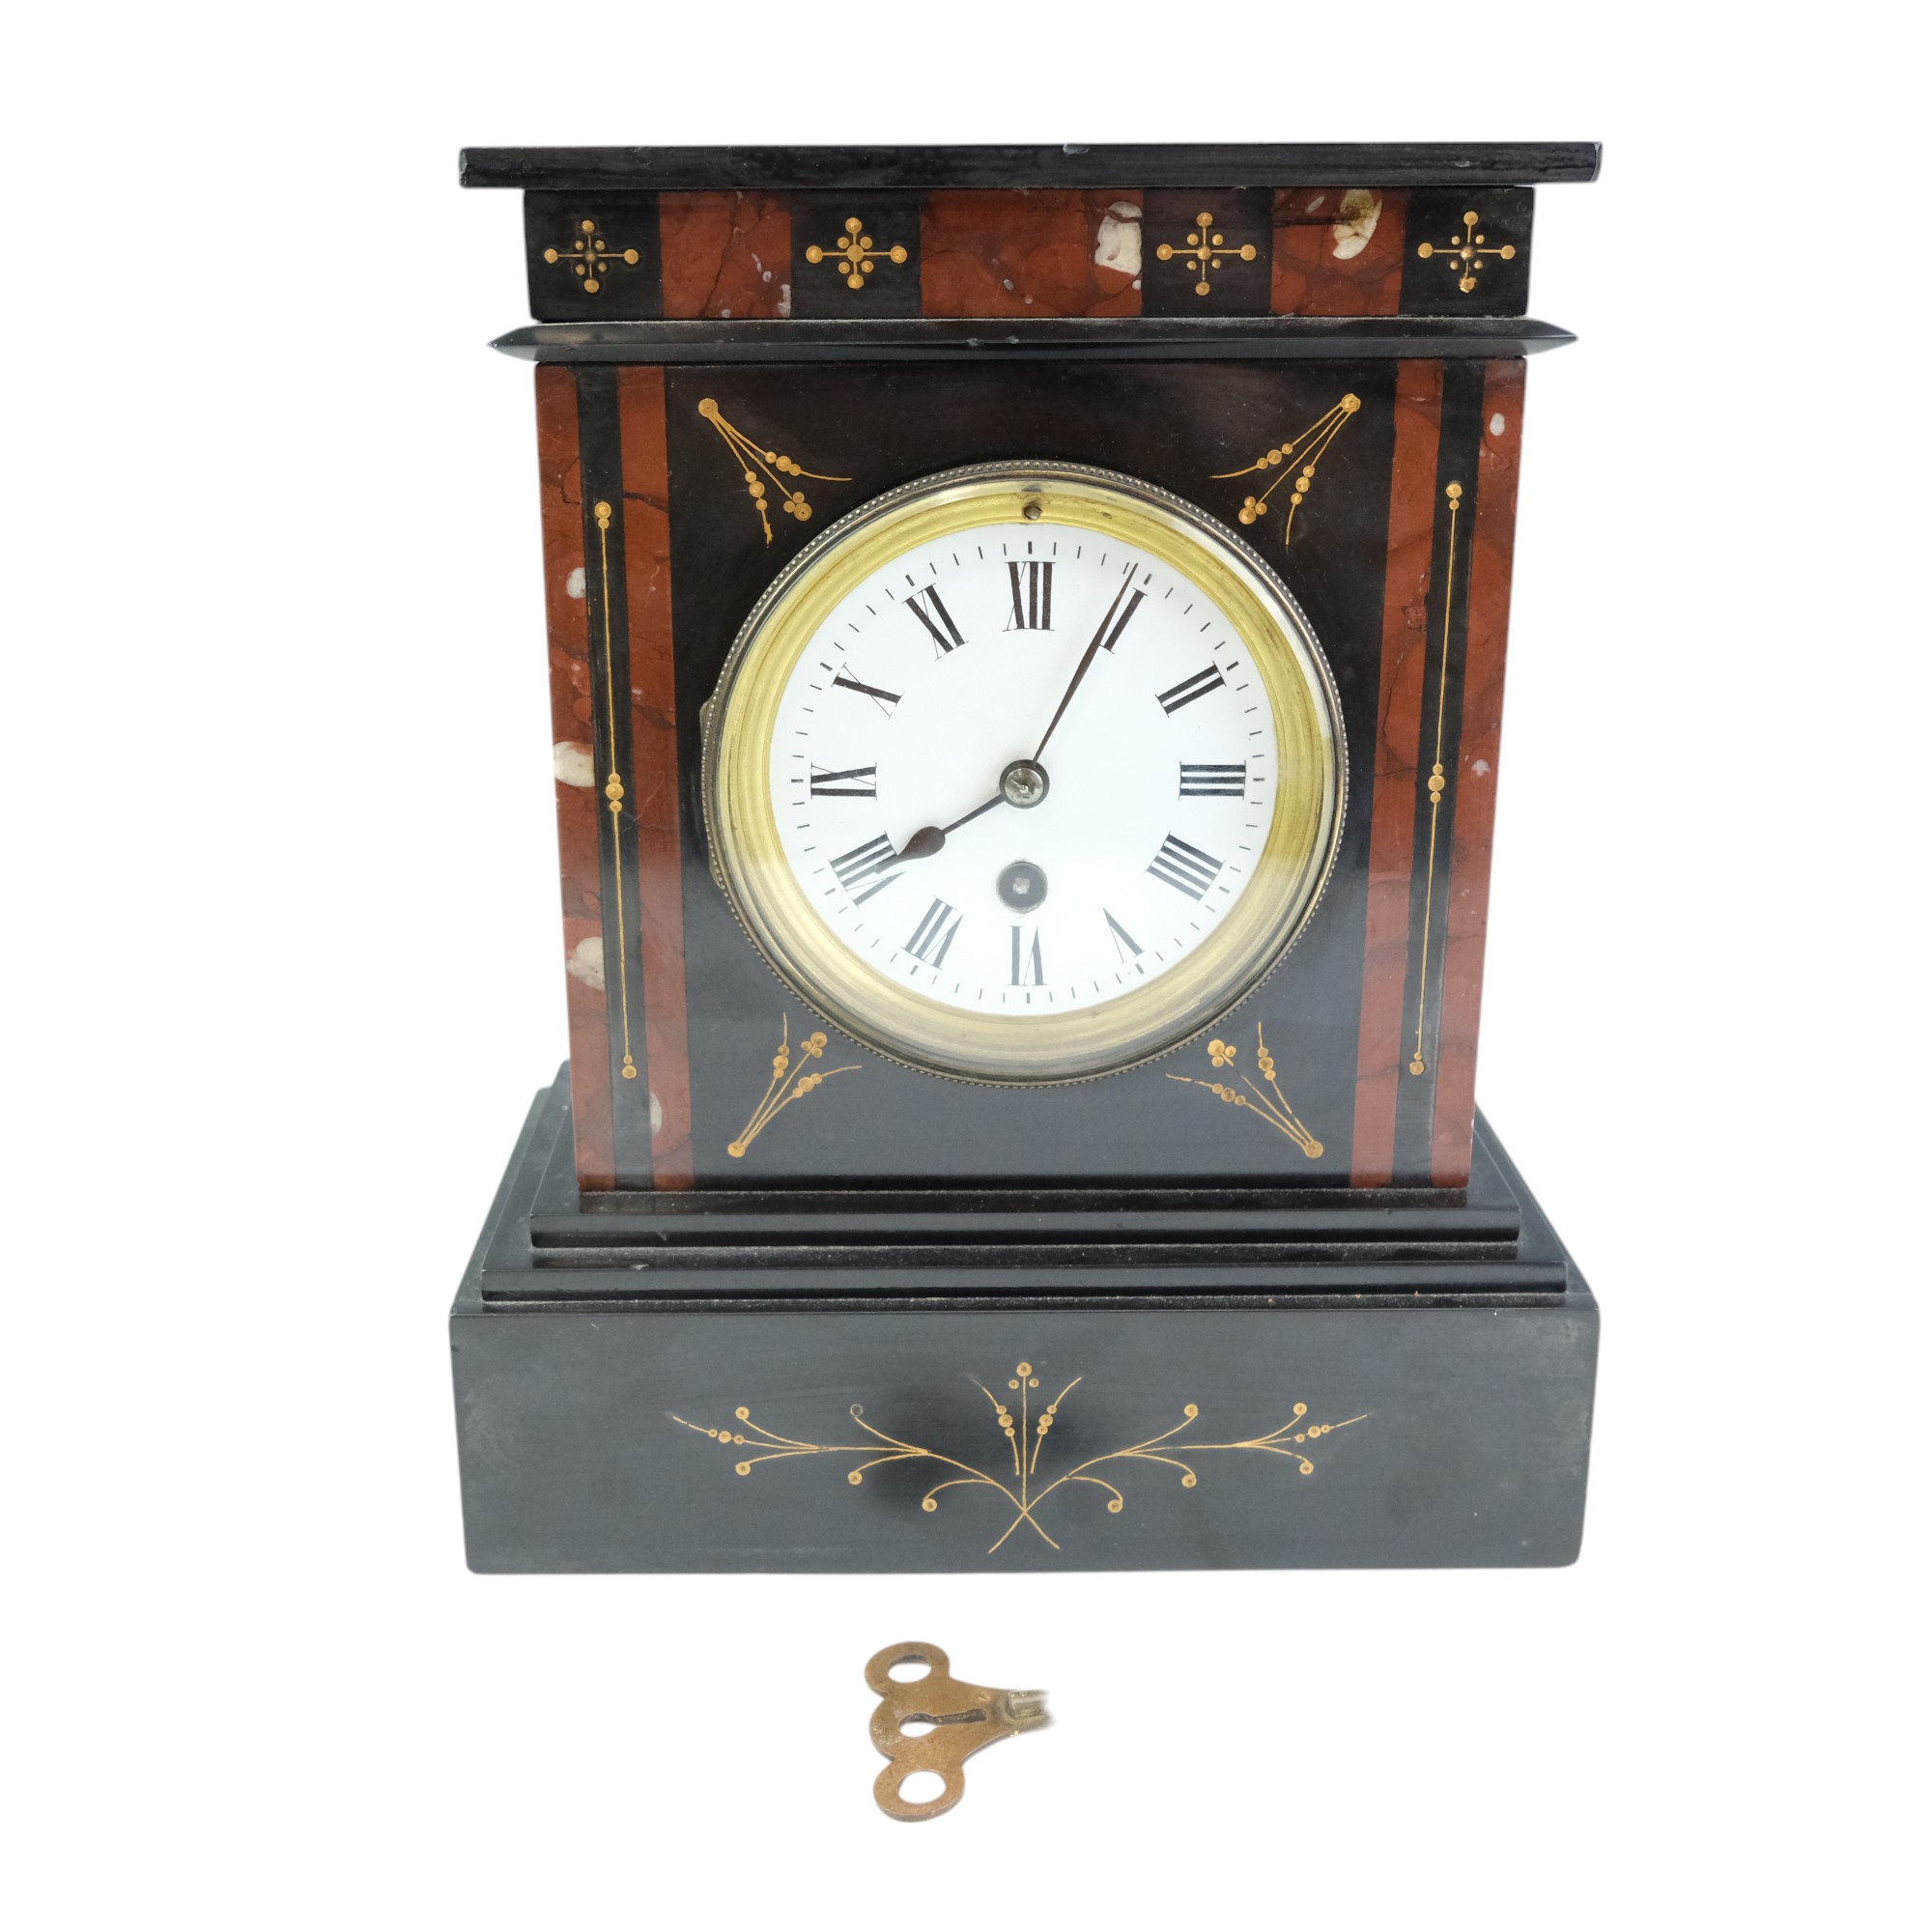 A Victorian parcel-gilt polished slate and red marble mantle clock having a single train movement, - Image 5 of 5